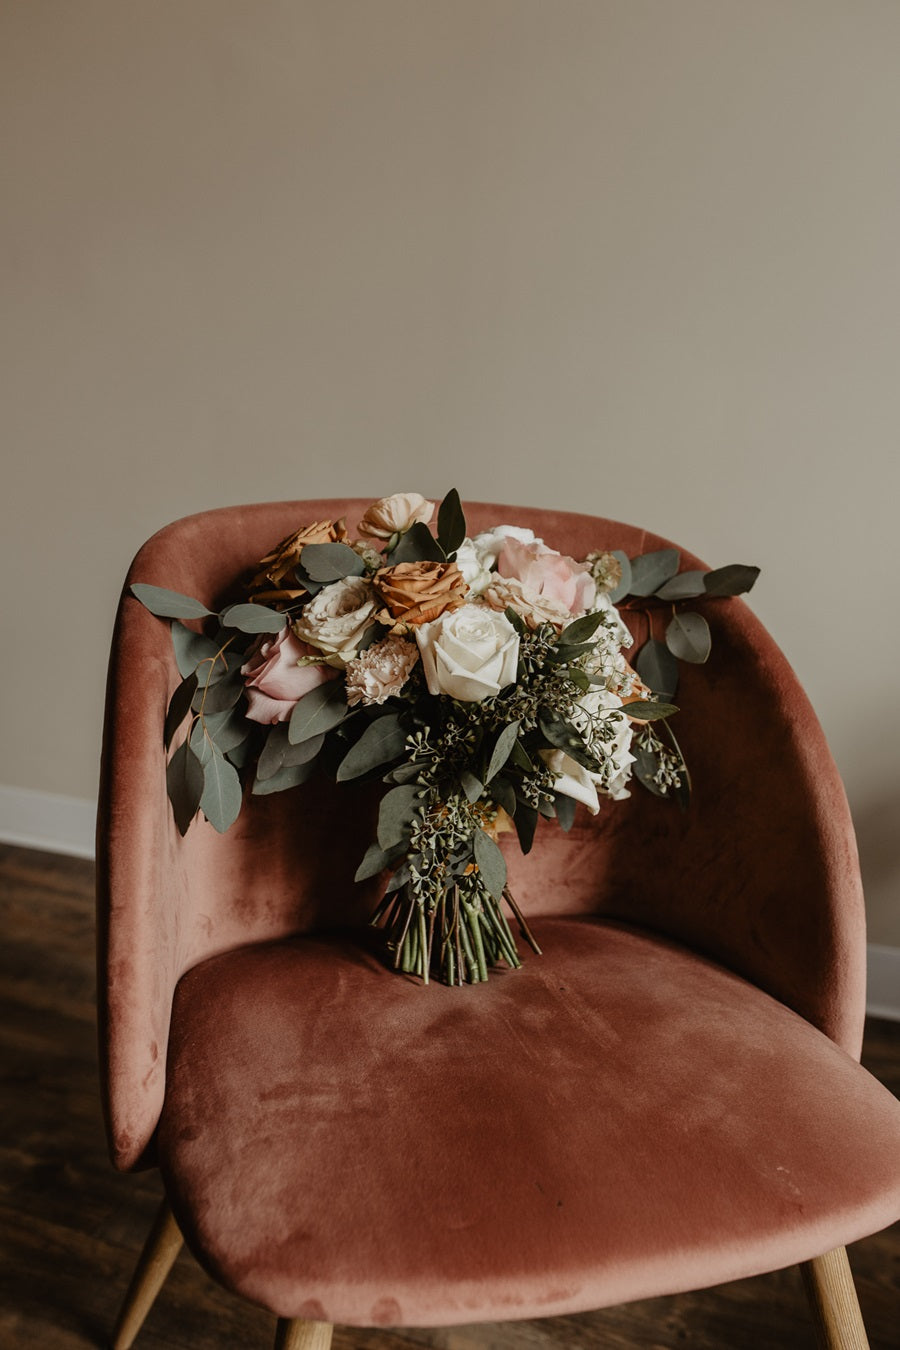 Bridal bouquet with peach, pink, and greenery, propped up on an orange suede chair.